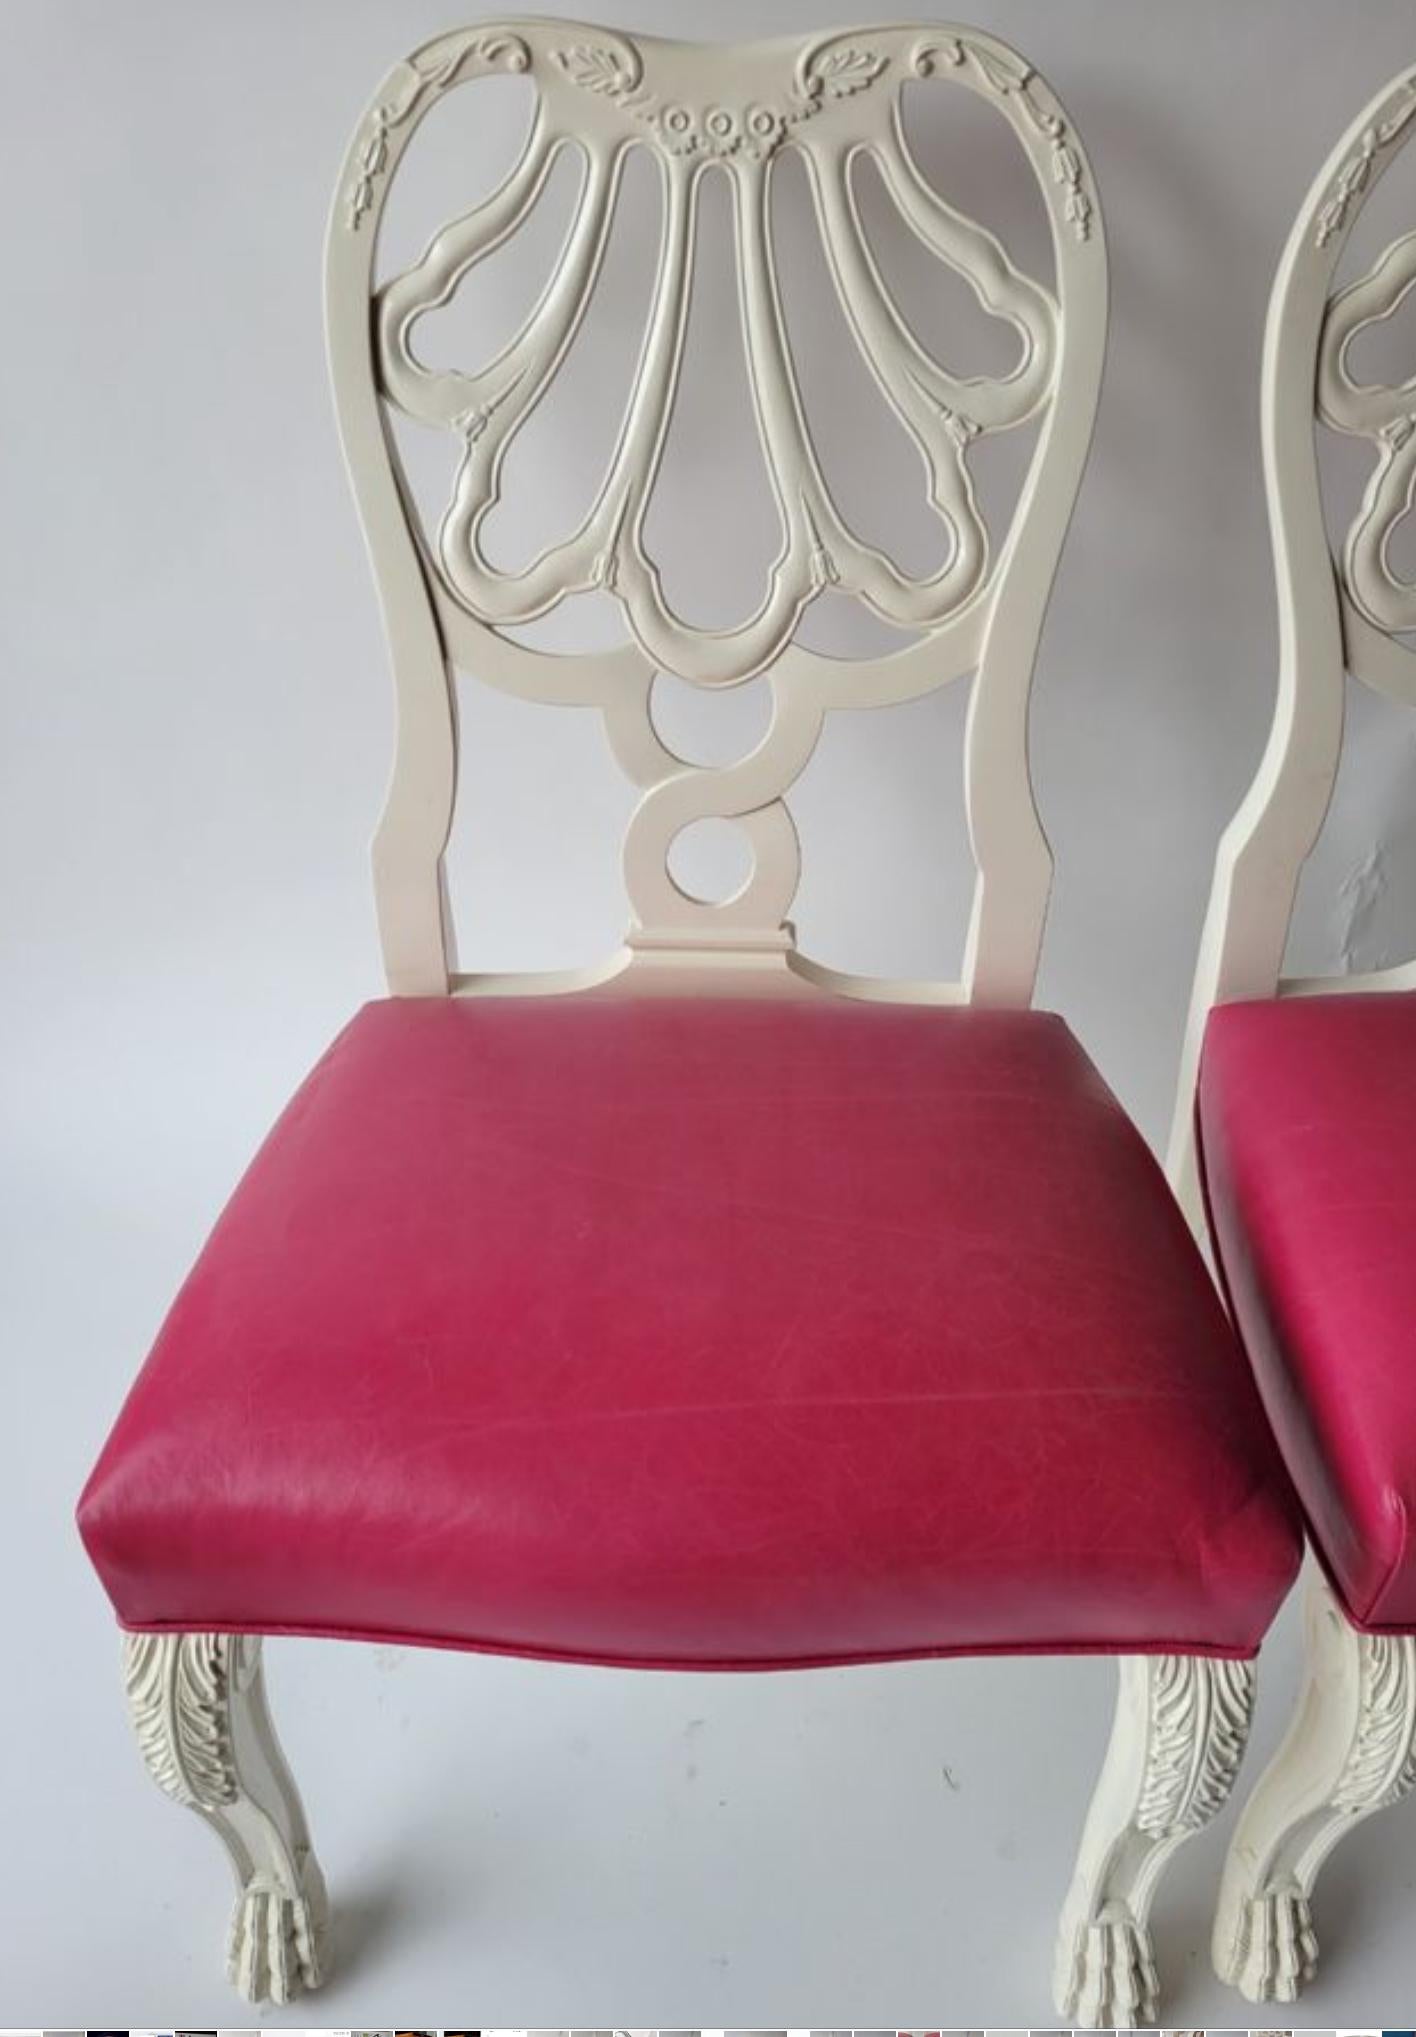 Pair of Charlotte Moss Hollywood Regency White Lacquer & Pink Leather Dining Chairs.
This listing is for one pair of side chairs but we have three pair available plus one pair of matching arm chairs. They were part of a Charlotte Moss design